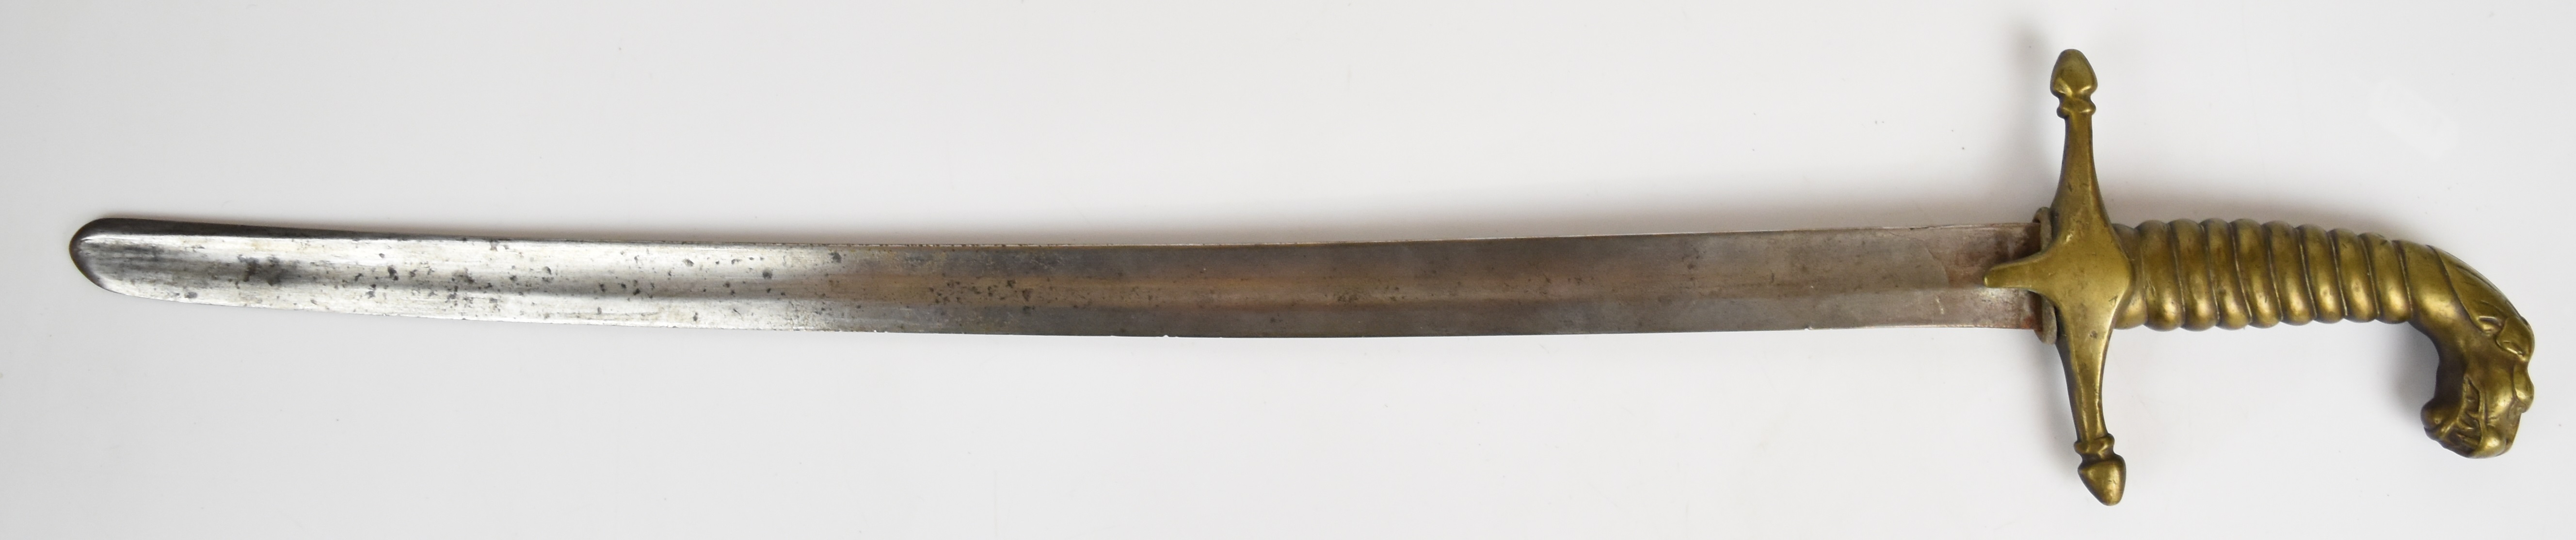 Naval type dirk with lion head pommel, brass grip and crosspiece, 50cm fullered single edged blade - Image 2 of 8